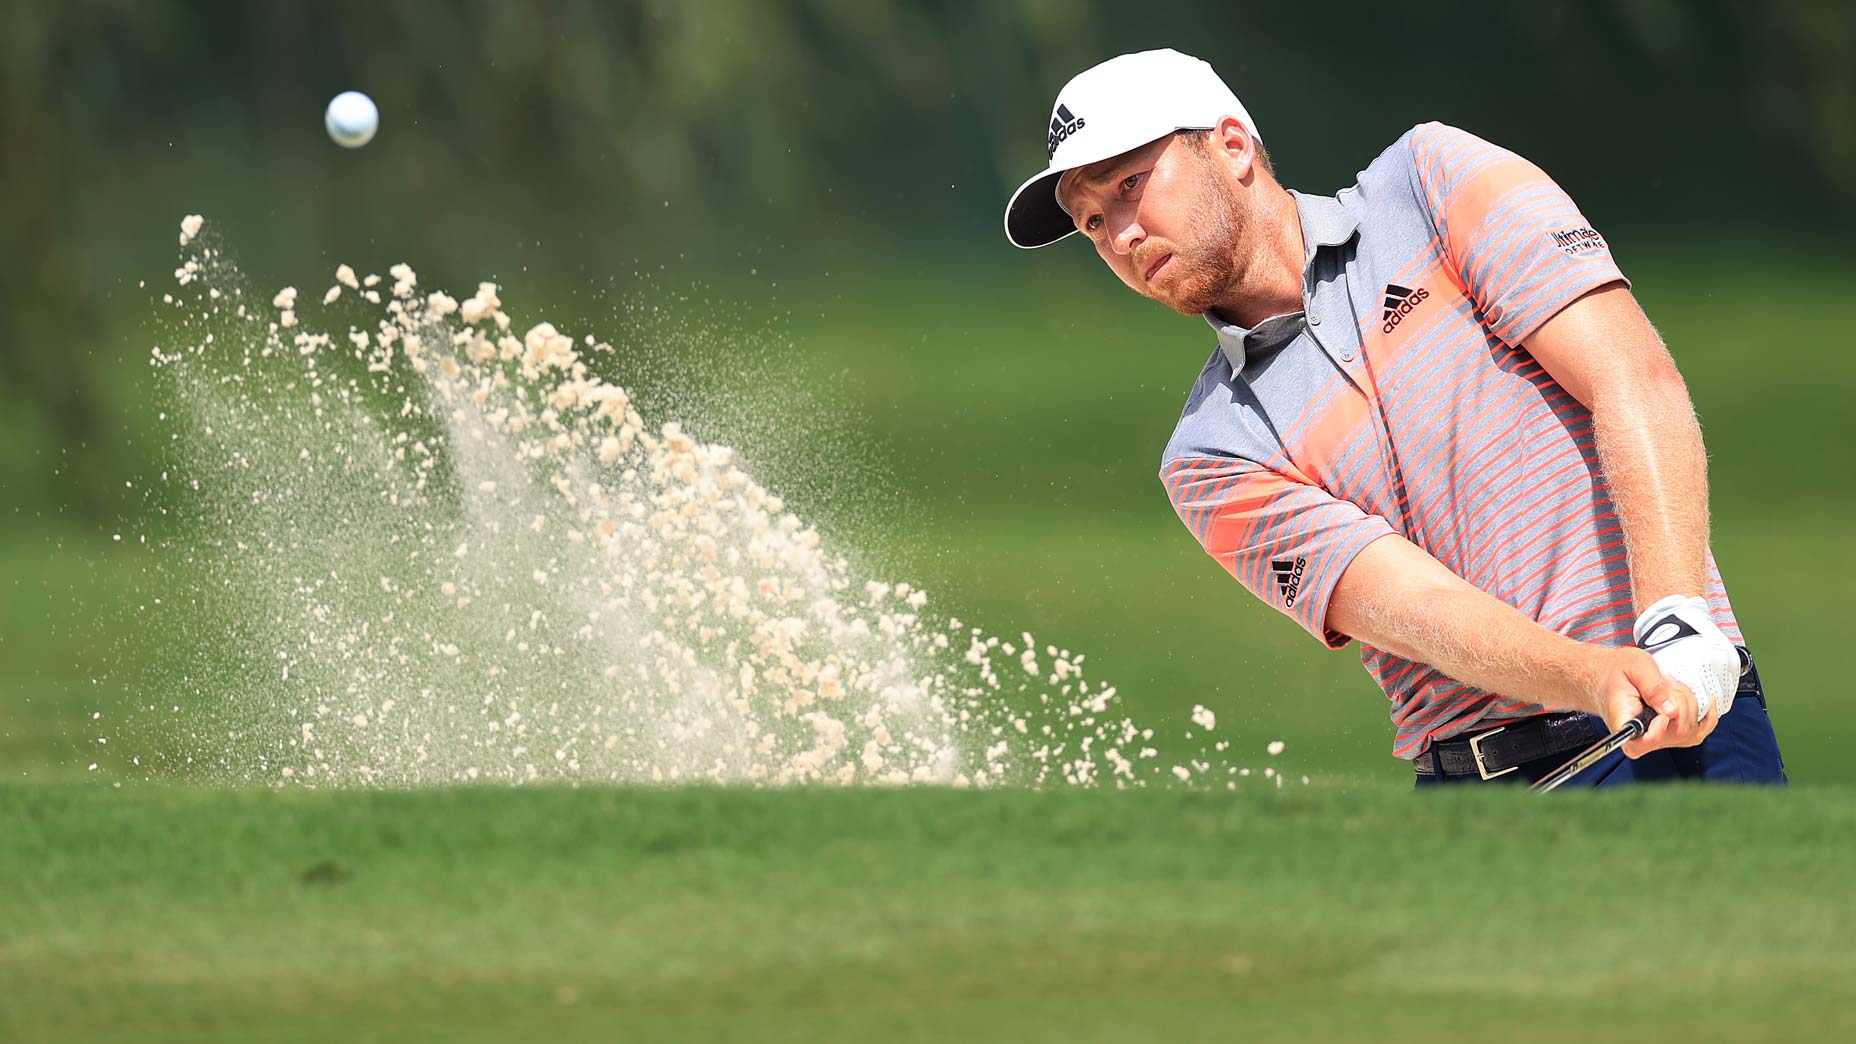 How to hit a bunker shot: Daniel Berger's 5 tips for escaping the sand